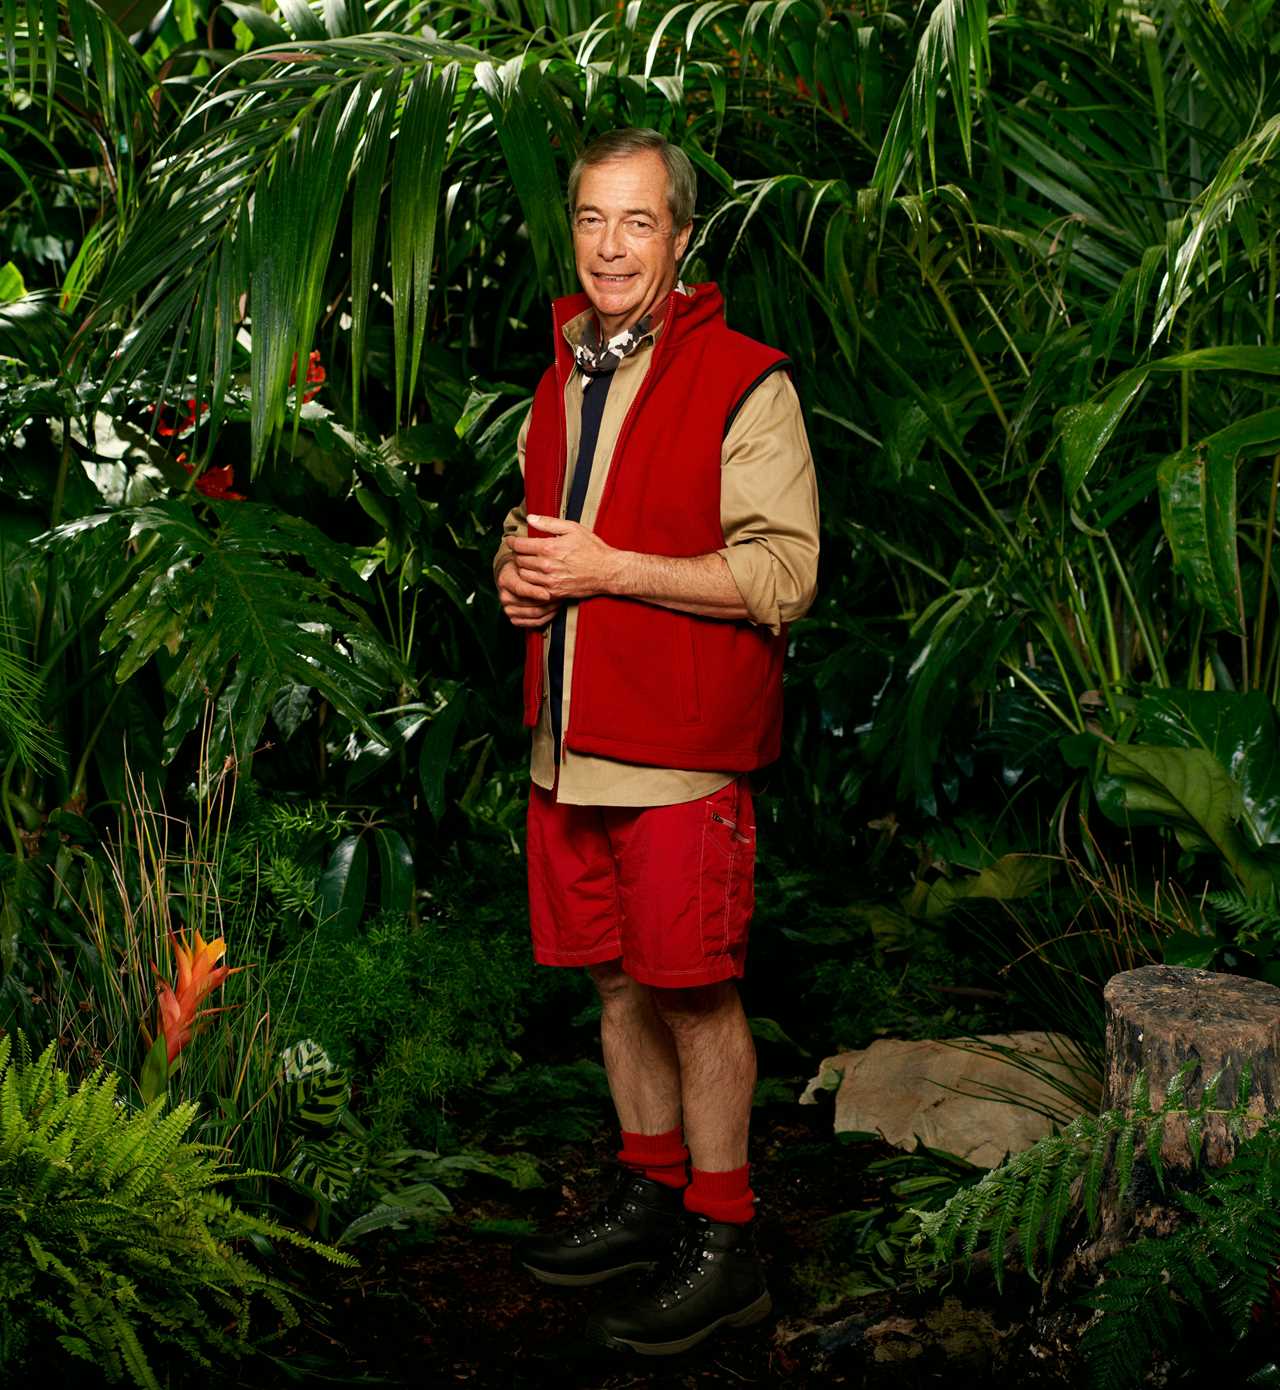 I'm A Celeb in new 'fix' row as Nigel Farage's team accused of 'fakery' in desperate bid to help him win